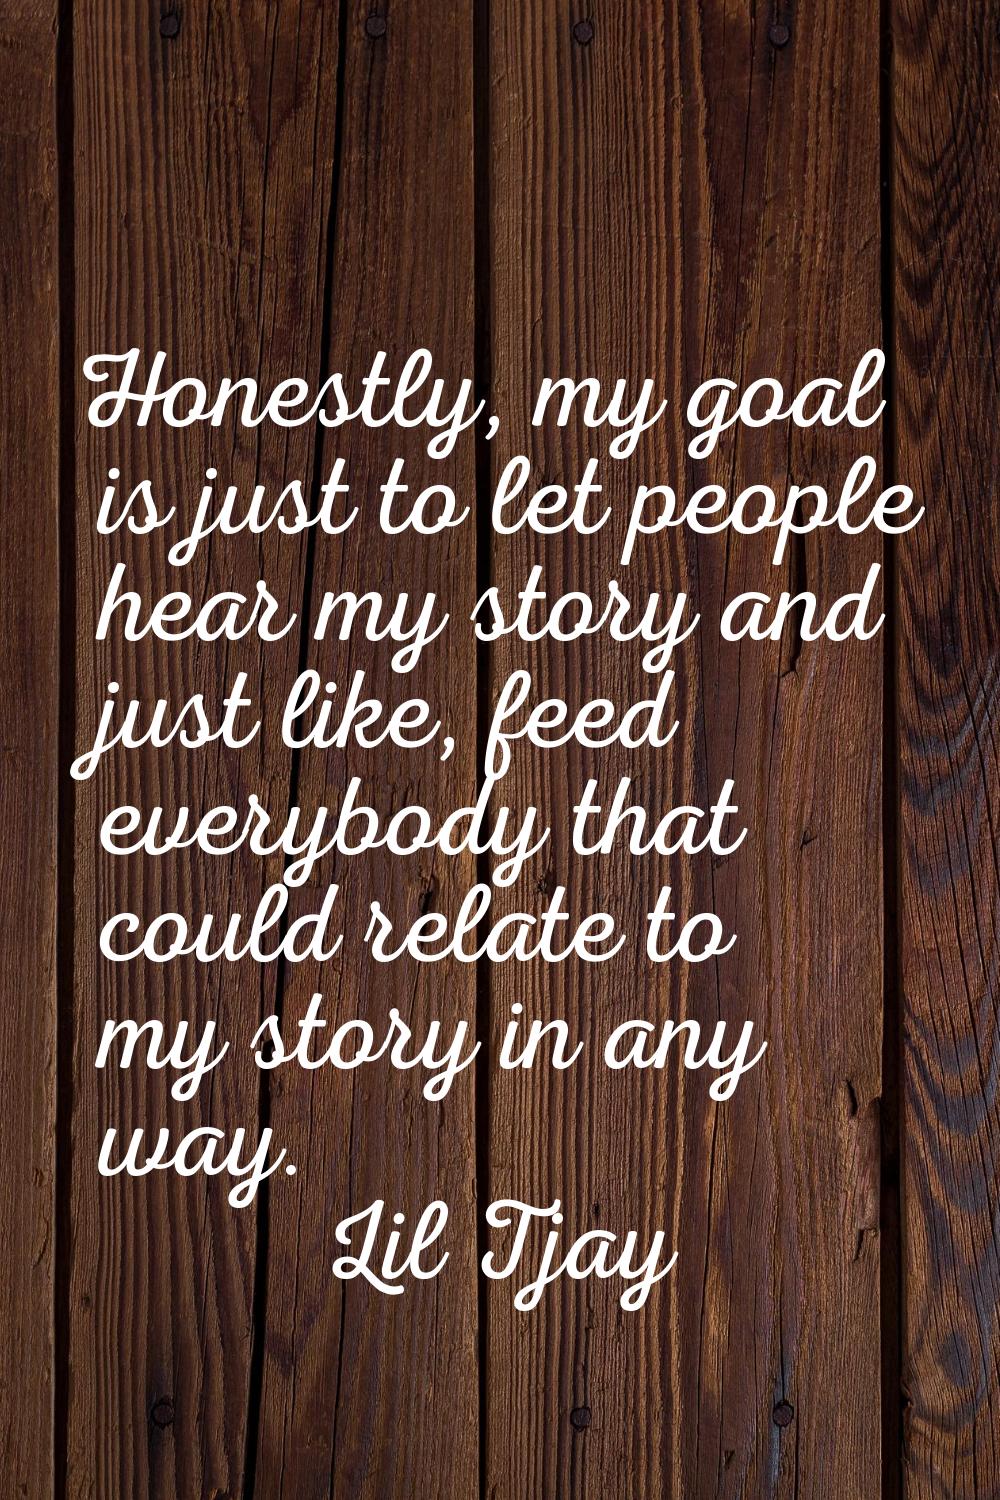 Honestly, my goal is just to let people hear my story and just like, feed everybody that could rela